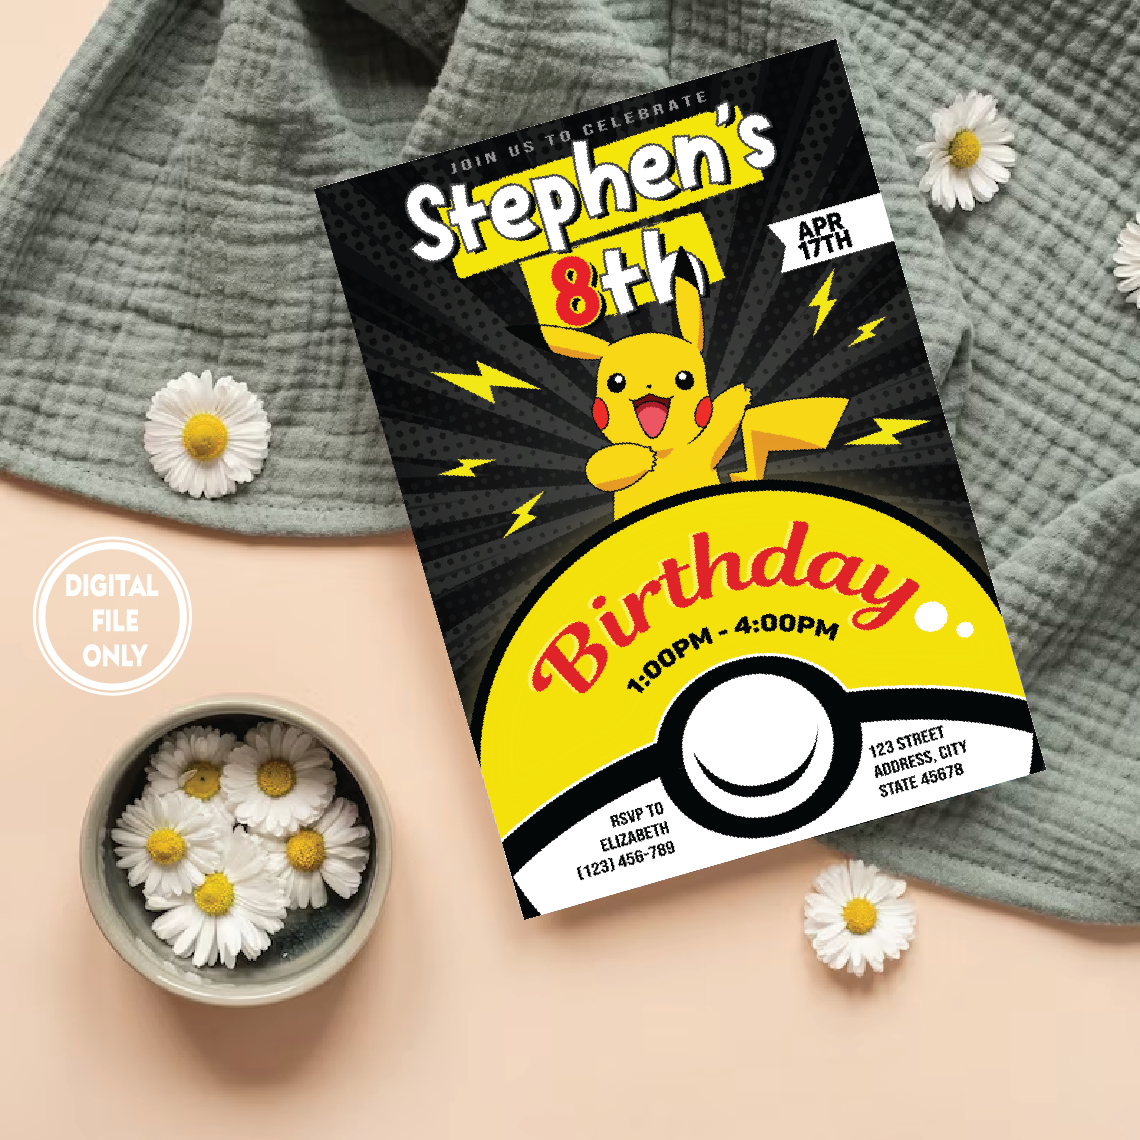 Personalized File Pokemone Birthday Invitation, Pokemon Birthday Invitation, Pokemon Invitation, Pikachu Invitation, Pikachu Party Invite, Instant Download. PNG File Only